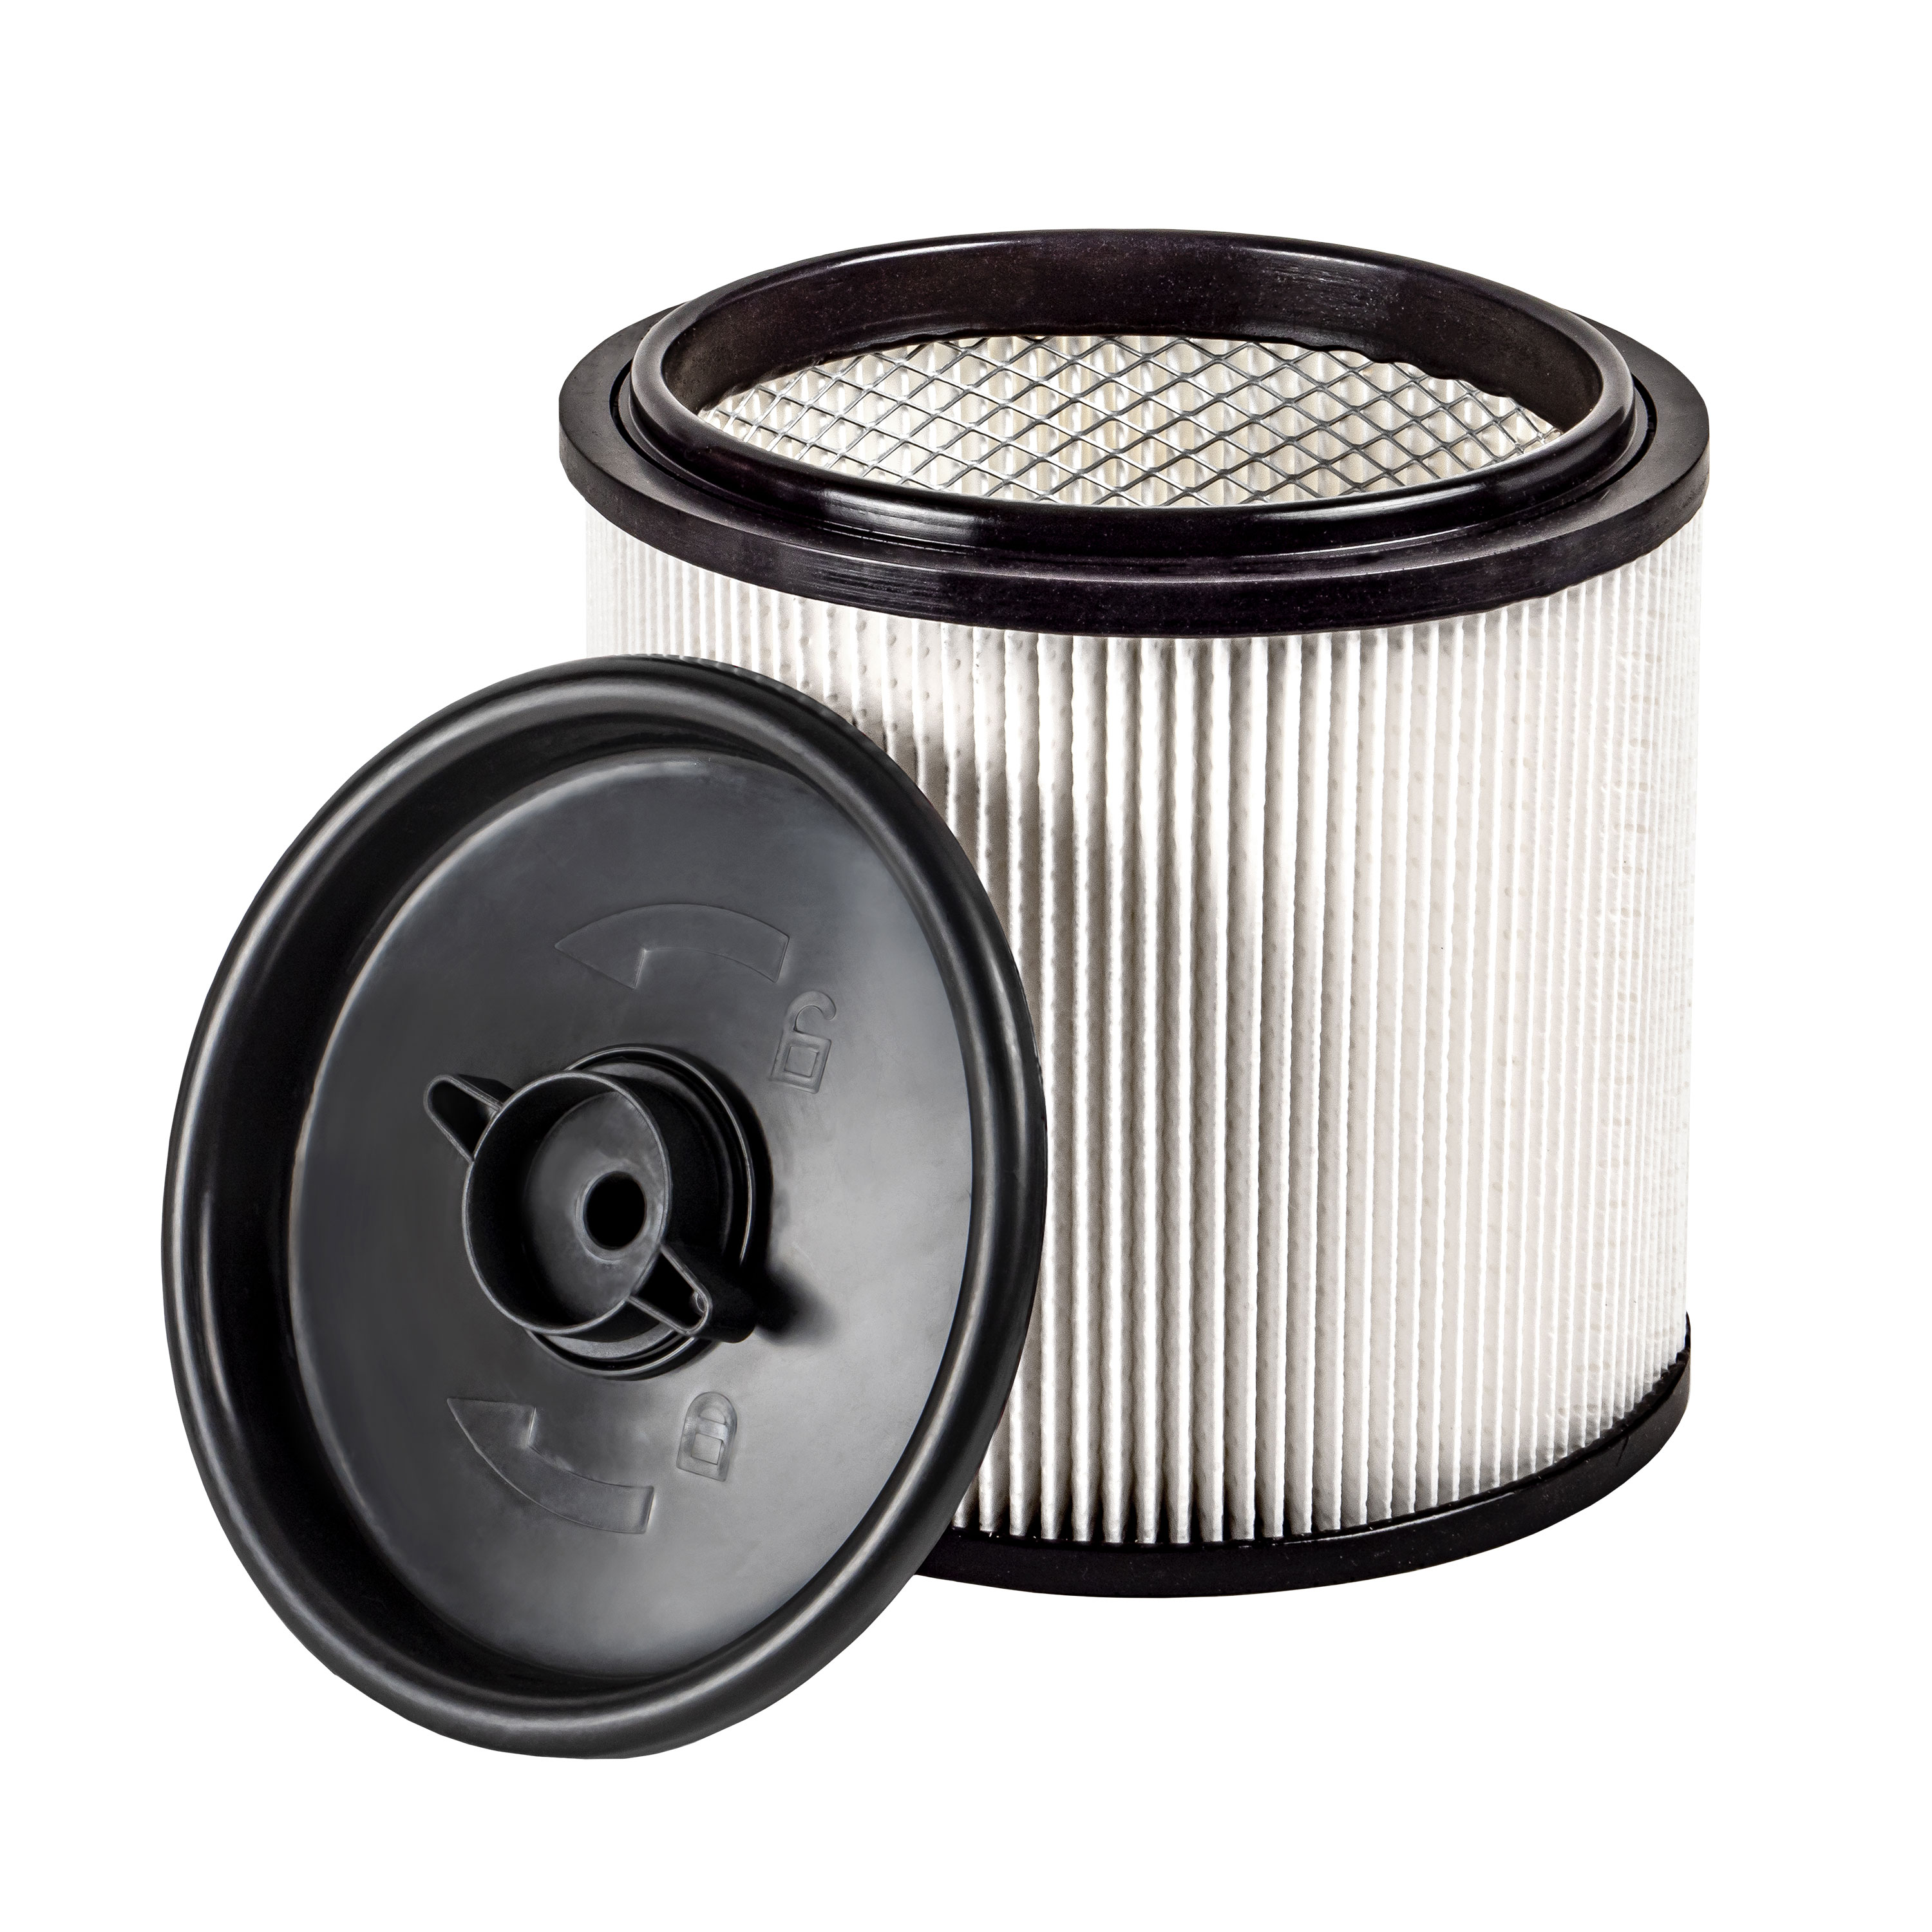 Dust Material Vacmaster HEPA (works Filter Fine Cartridge and with Retainer Shop-Vac)